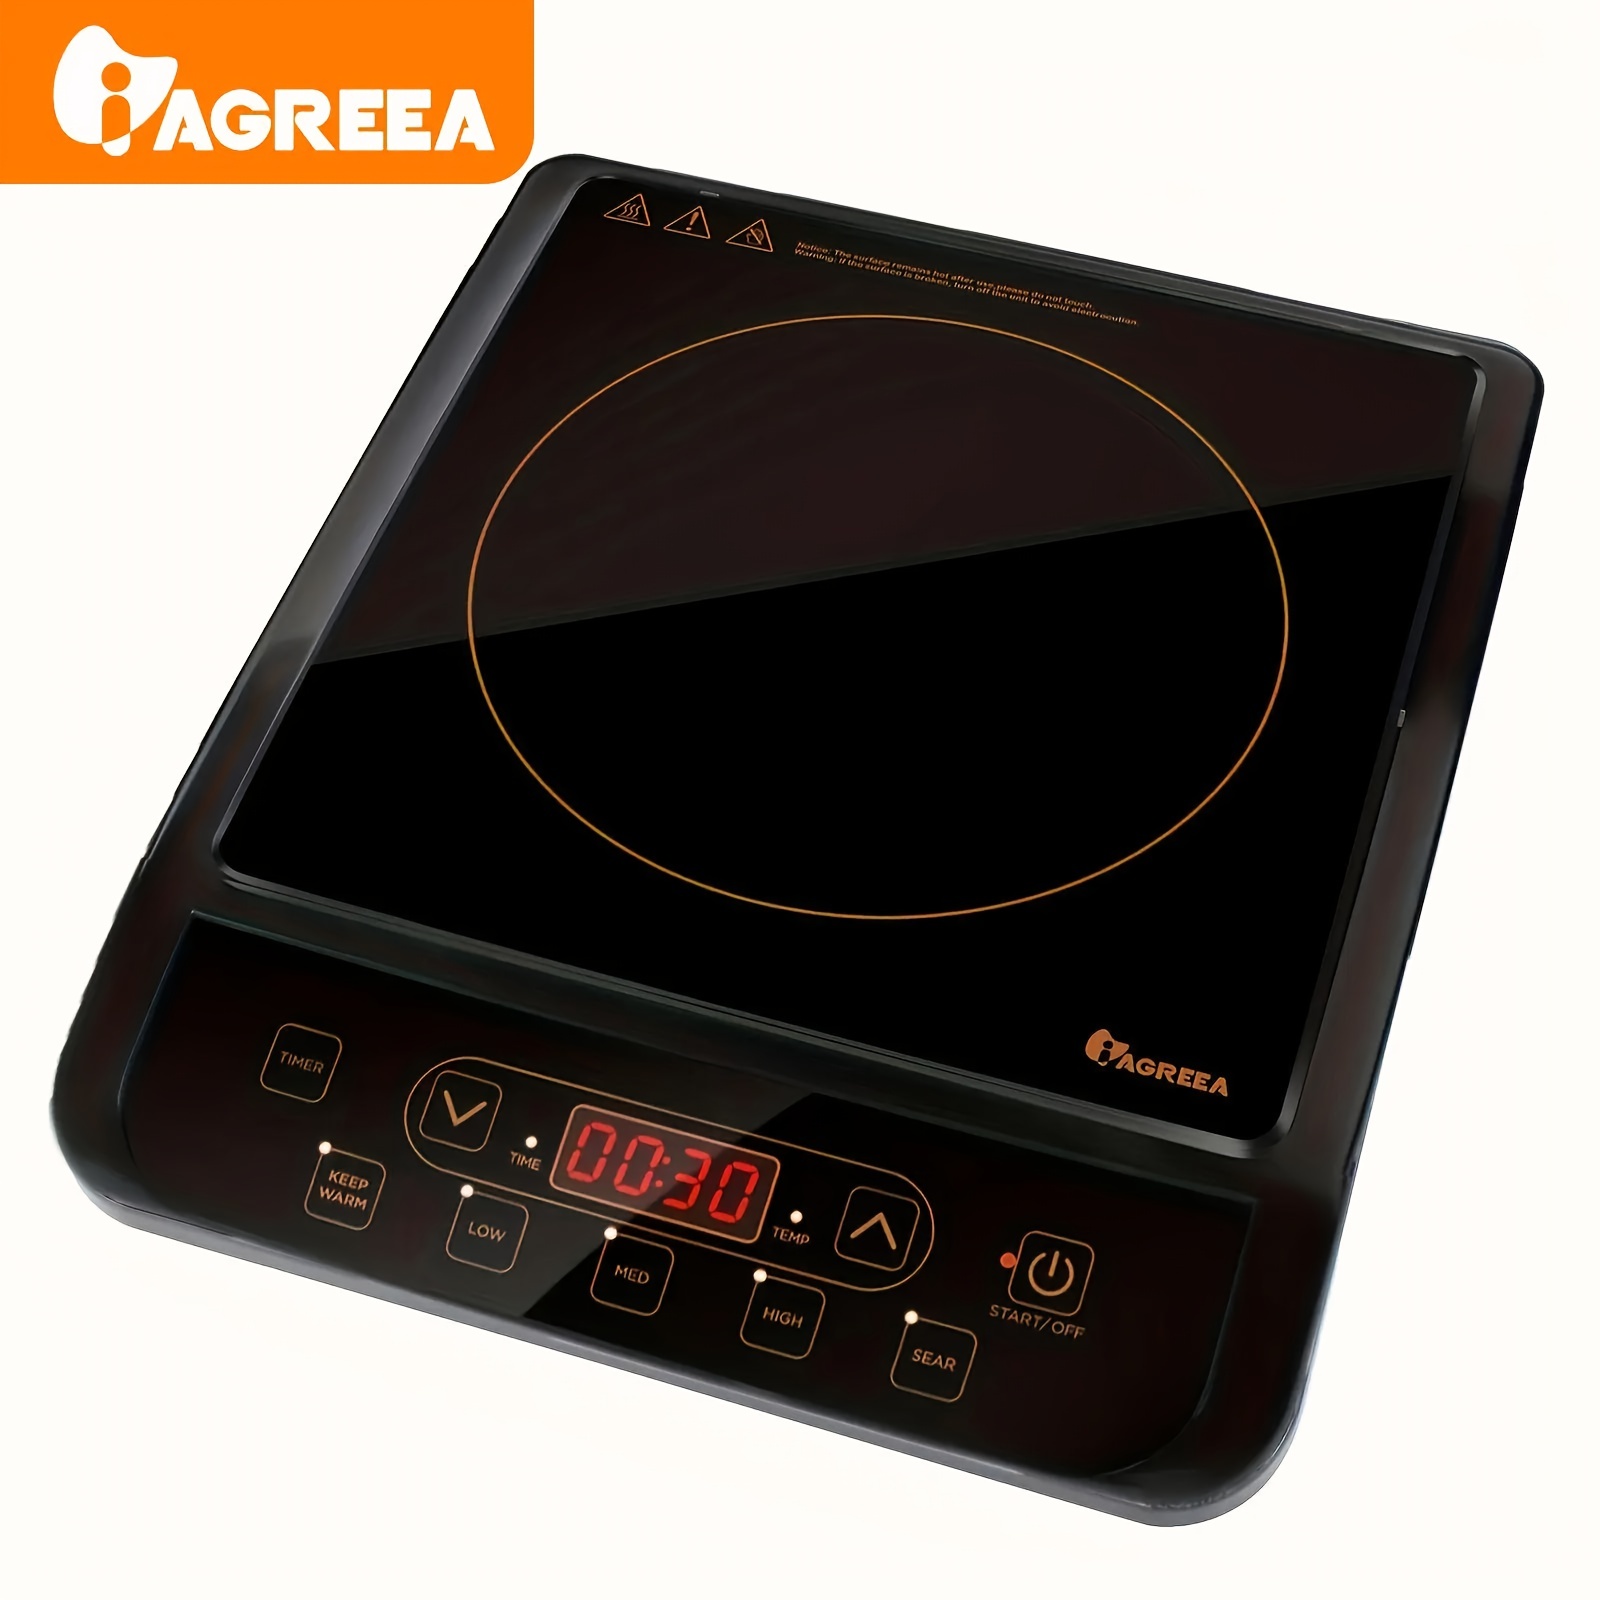 What is the Difference Between Hotplate and Induction Cooker 